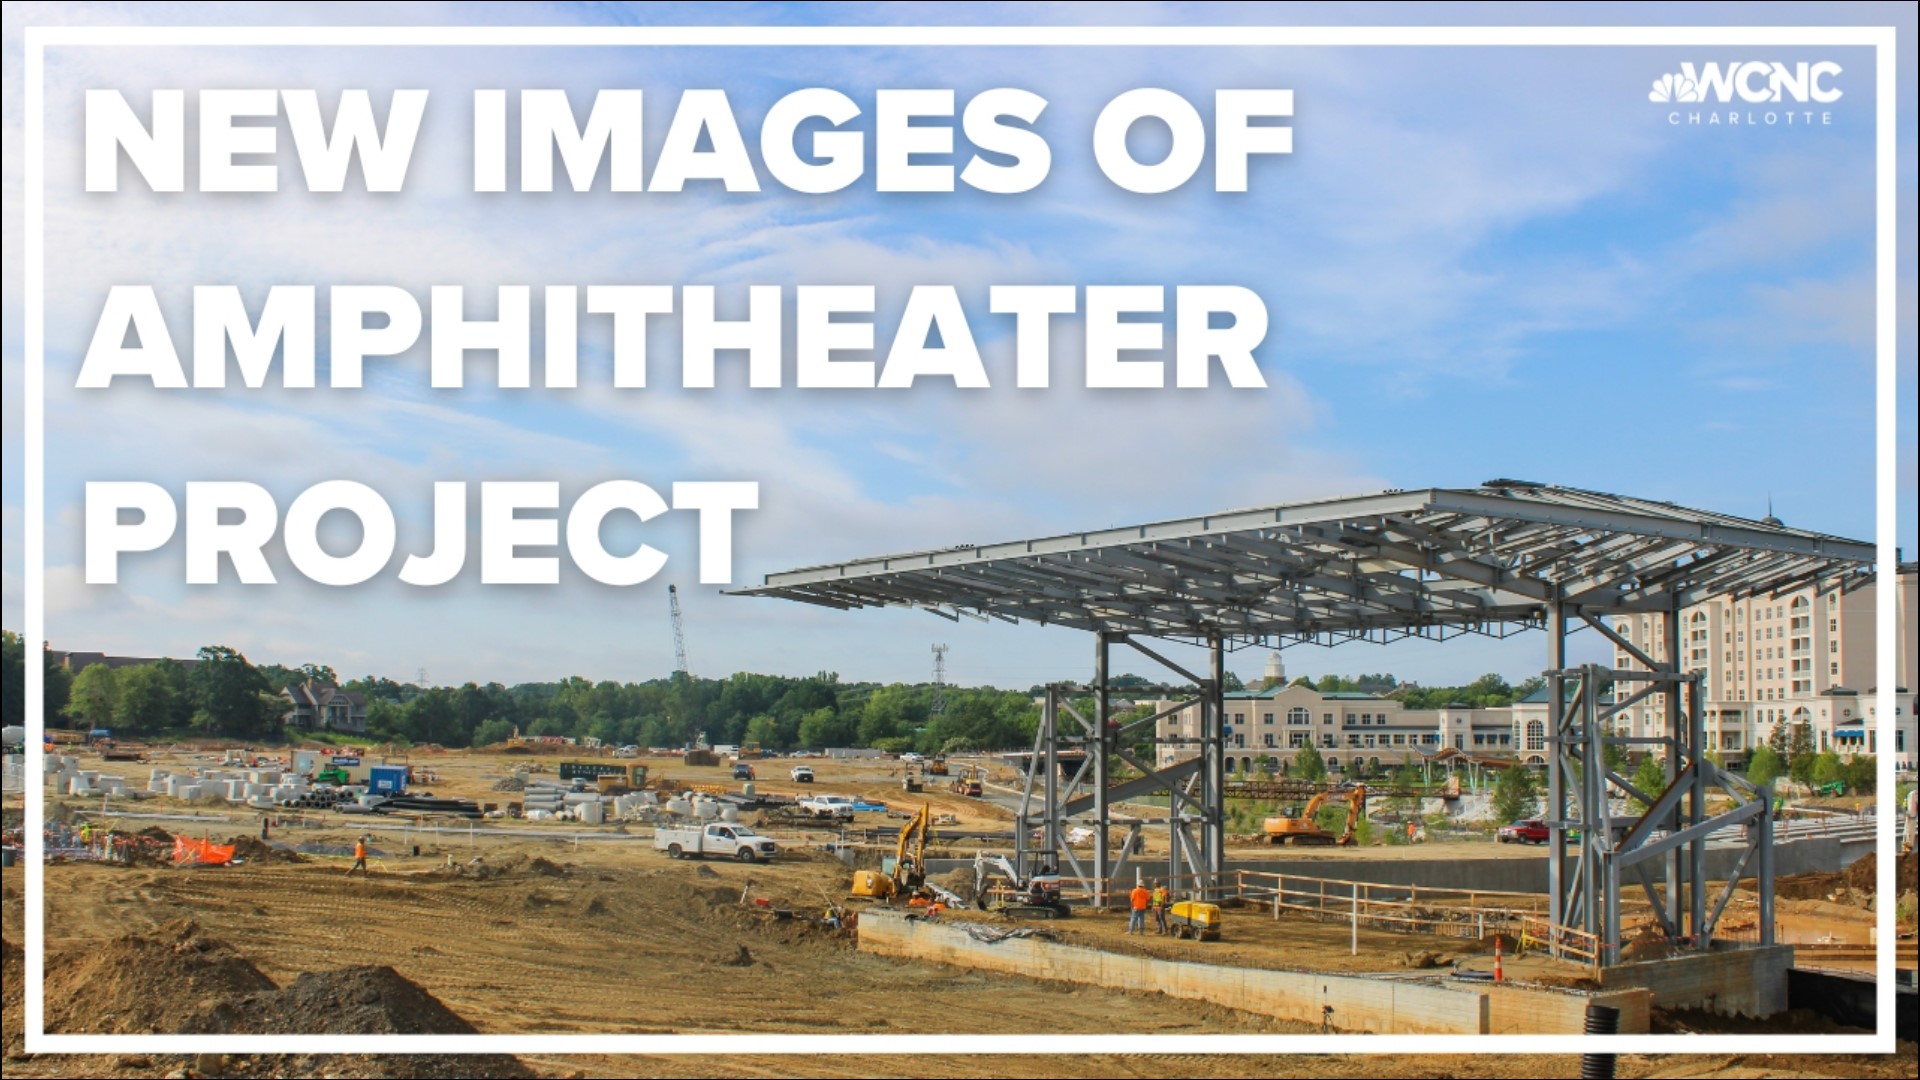 Newly-released images of the amphitheater under construction in South Charlotte's "Ballantyne reimagined project".